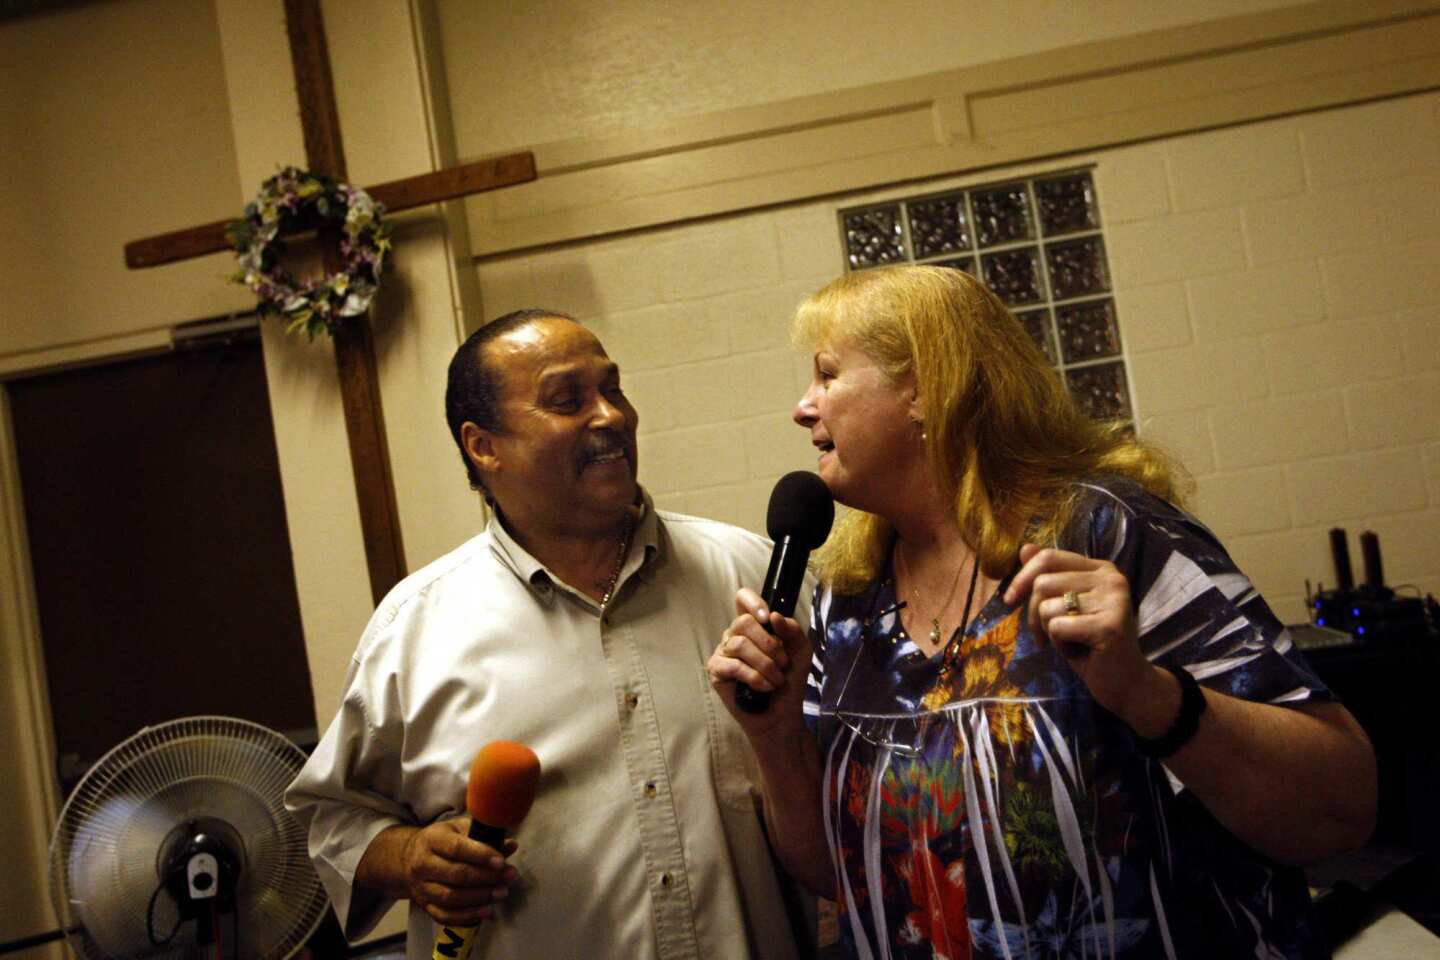 Pastor Tony Stallworth and his wife, Lucy, do a duet during karaoke night at the Central City Community Church of the Nazarene on skid row in Los Angeles on July 11, 2012. Lucy is the ongoing DJ who plays people's requests and Pastor Tony is the master of ceremonies. For the past 15 years the Stallworths have held a karaoke party every Wednesday night at their church for people living on the streets of skid row or those living in shelters and transitional housing.